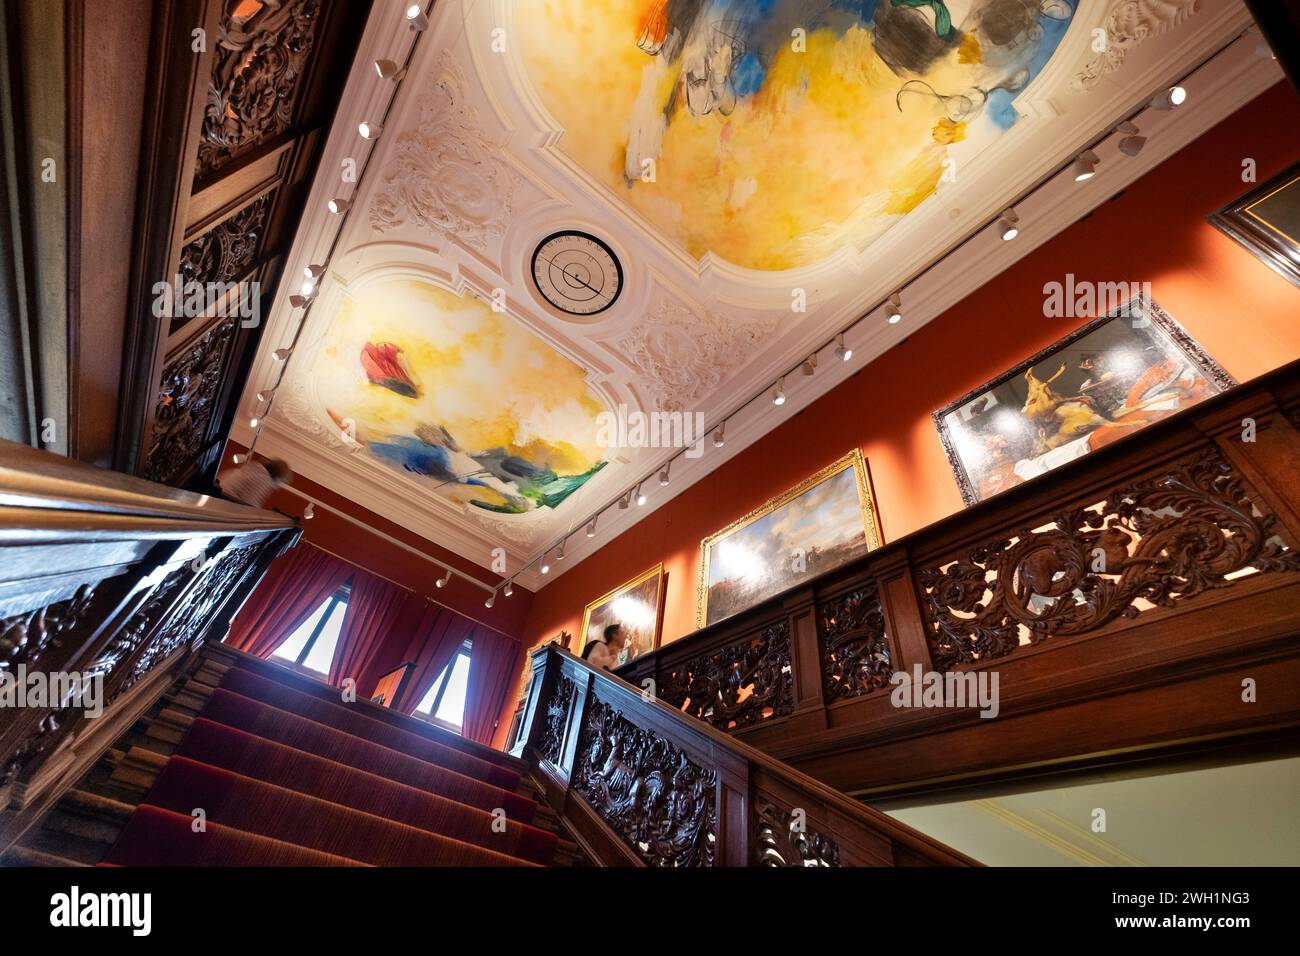 Impressive wooden decorated stairwell with beautifully painted ceiling in museum 'Mauritshuis' in the Dutch city of The Hague Stock Photo